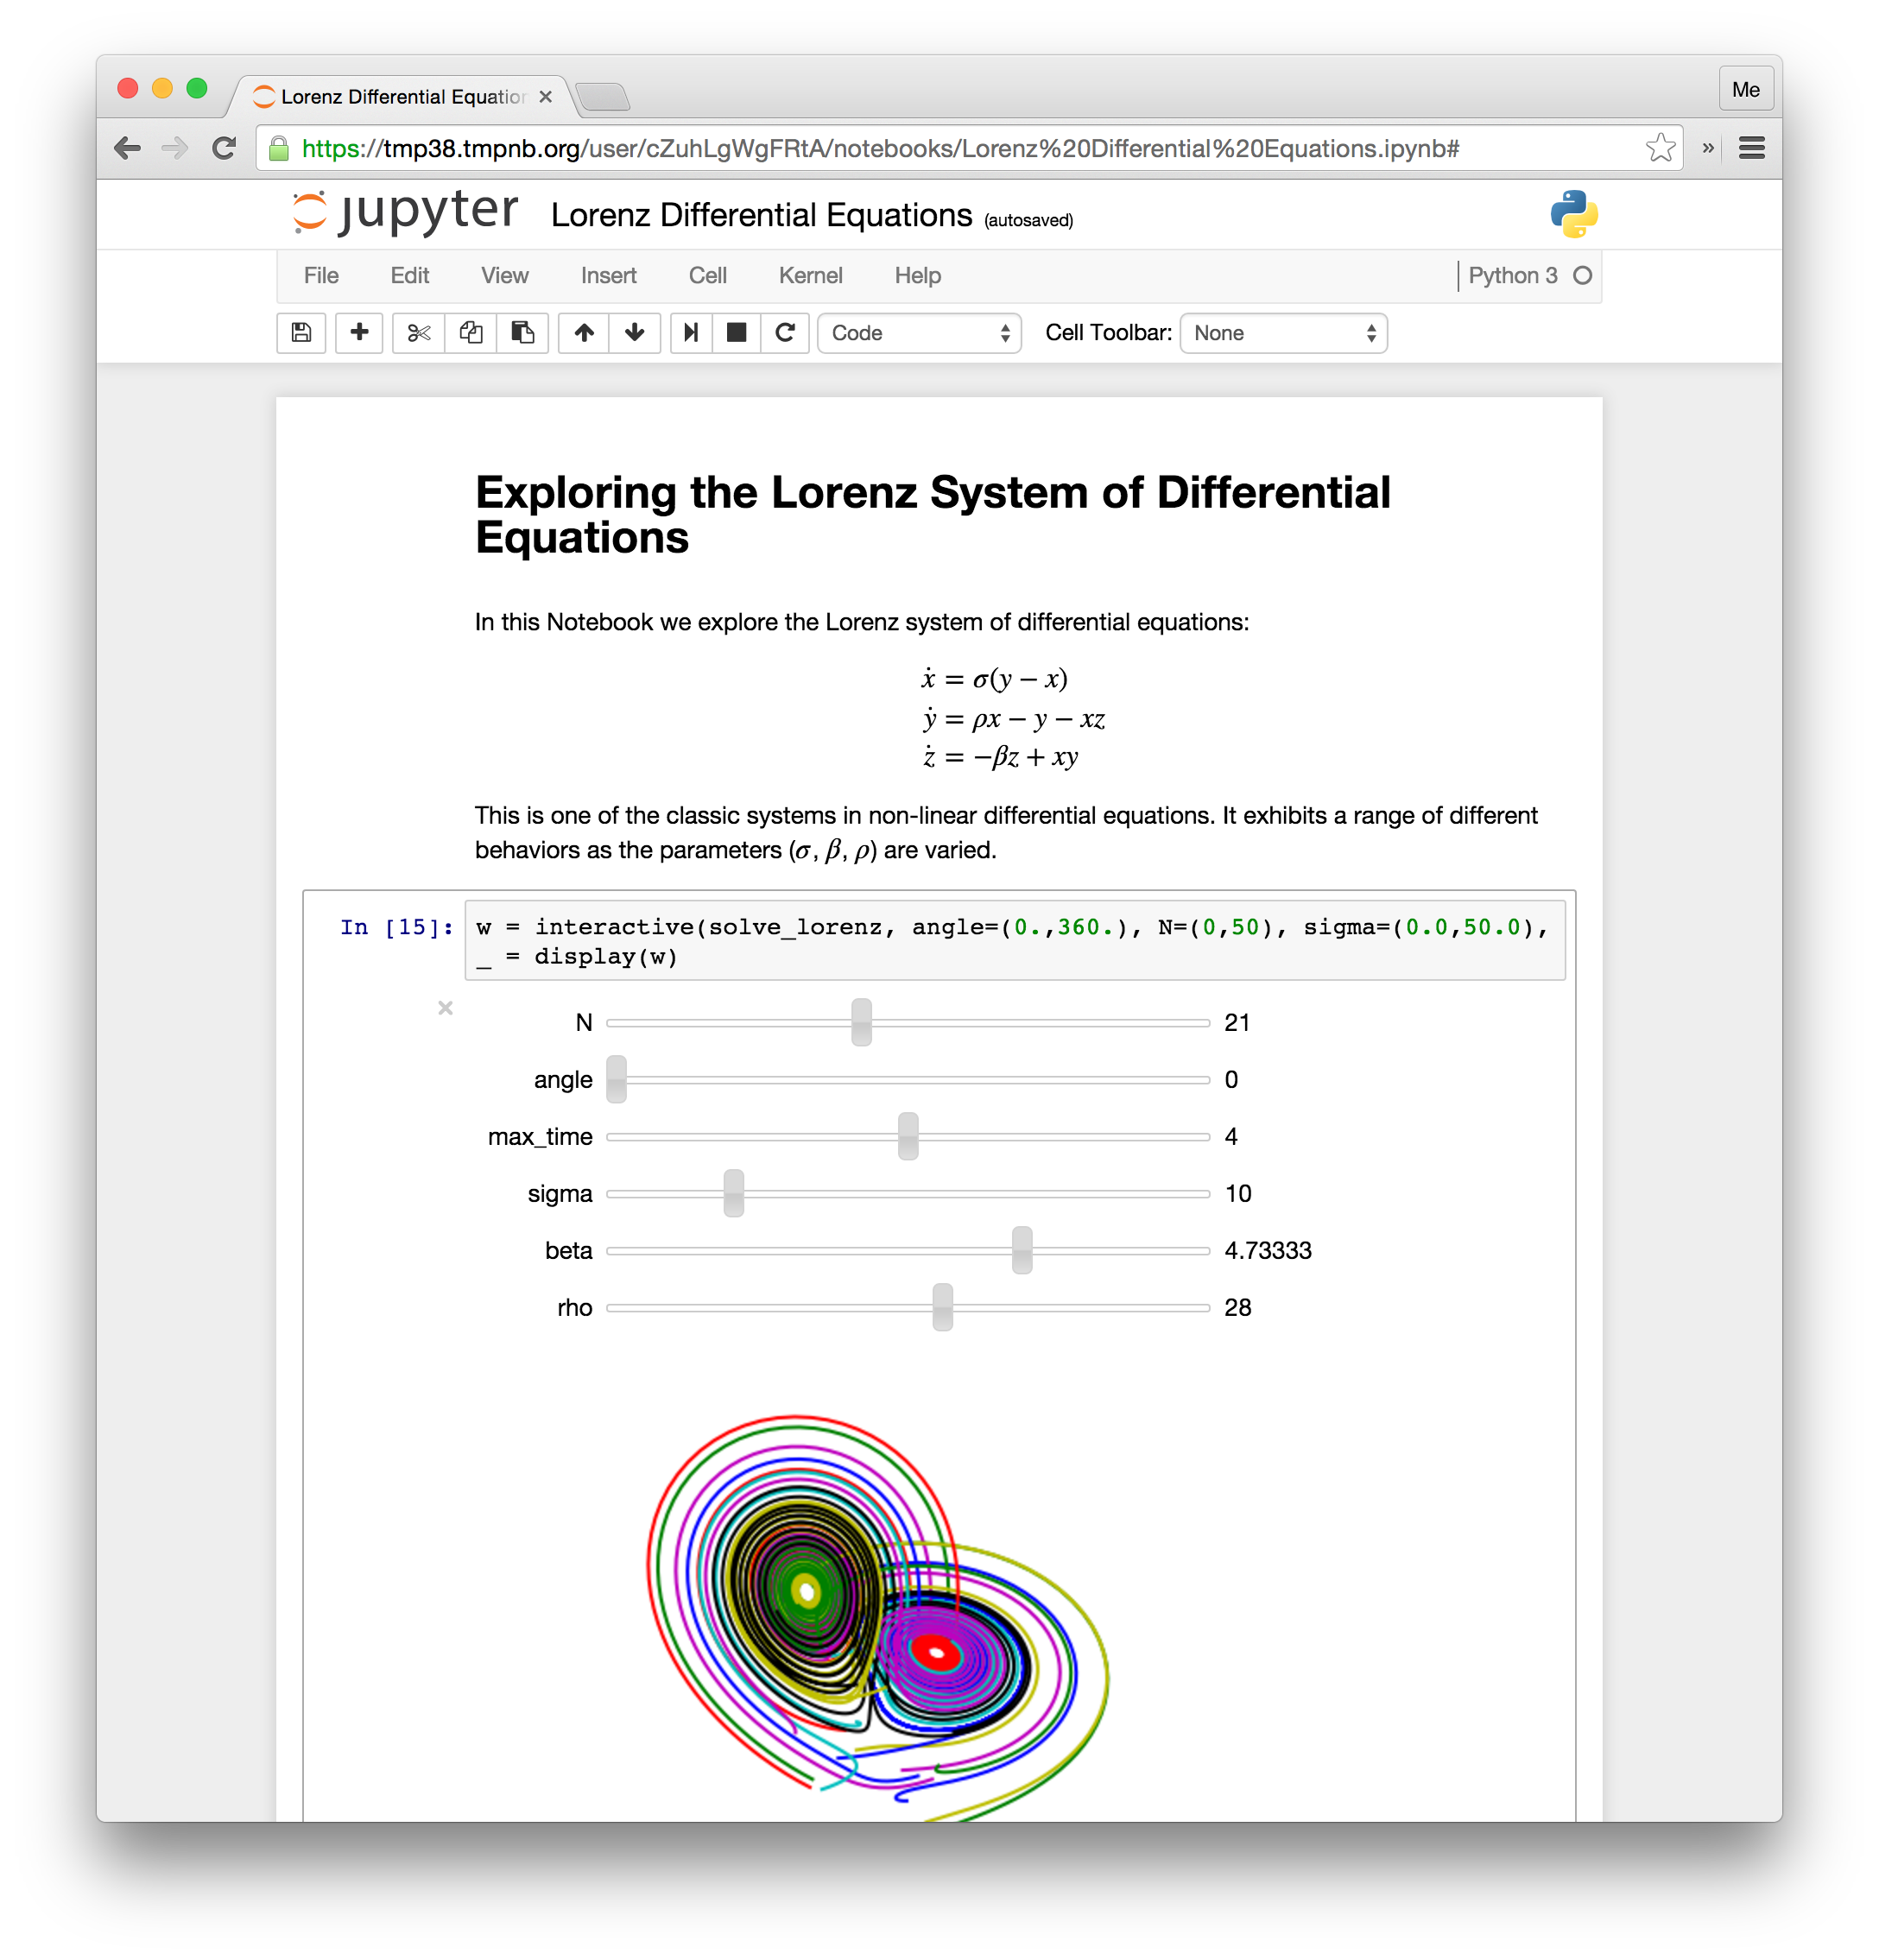 Screenshot of a notebook for exploring the Lorenz system of differential equations